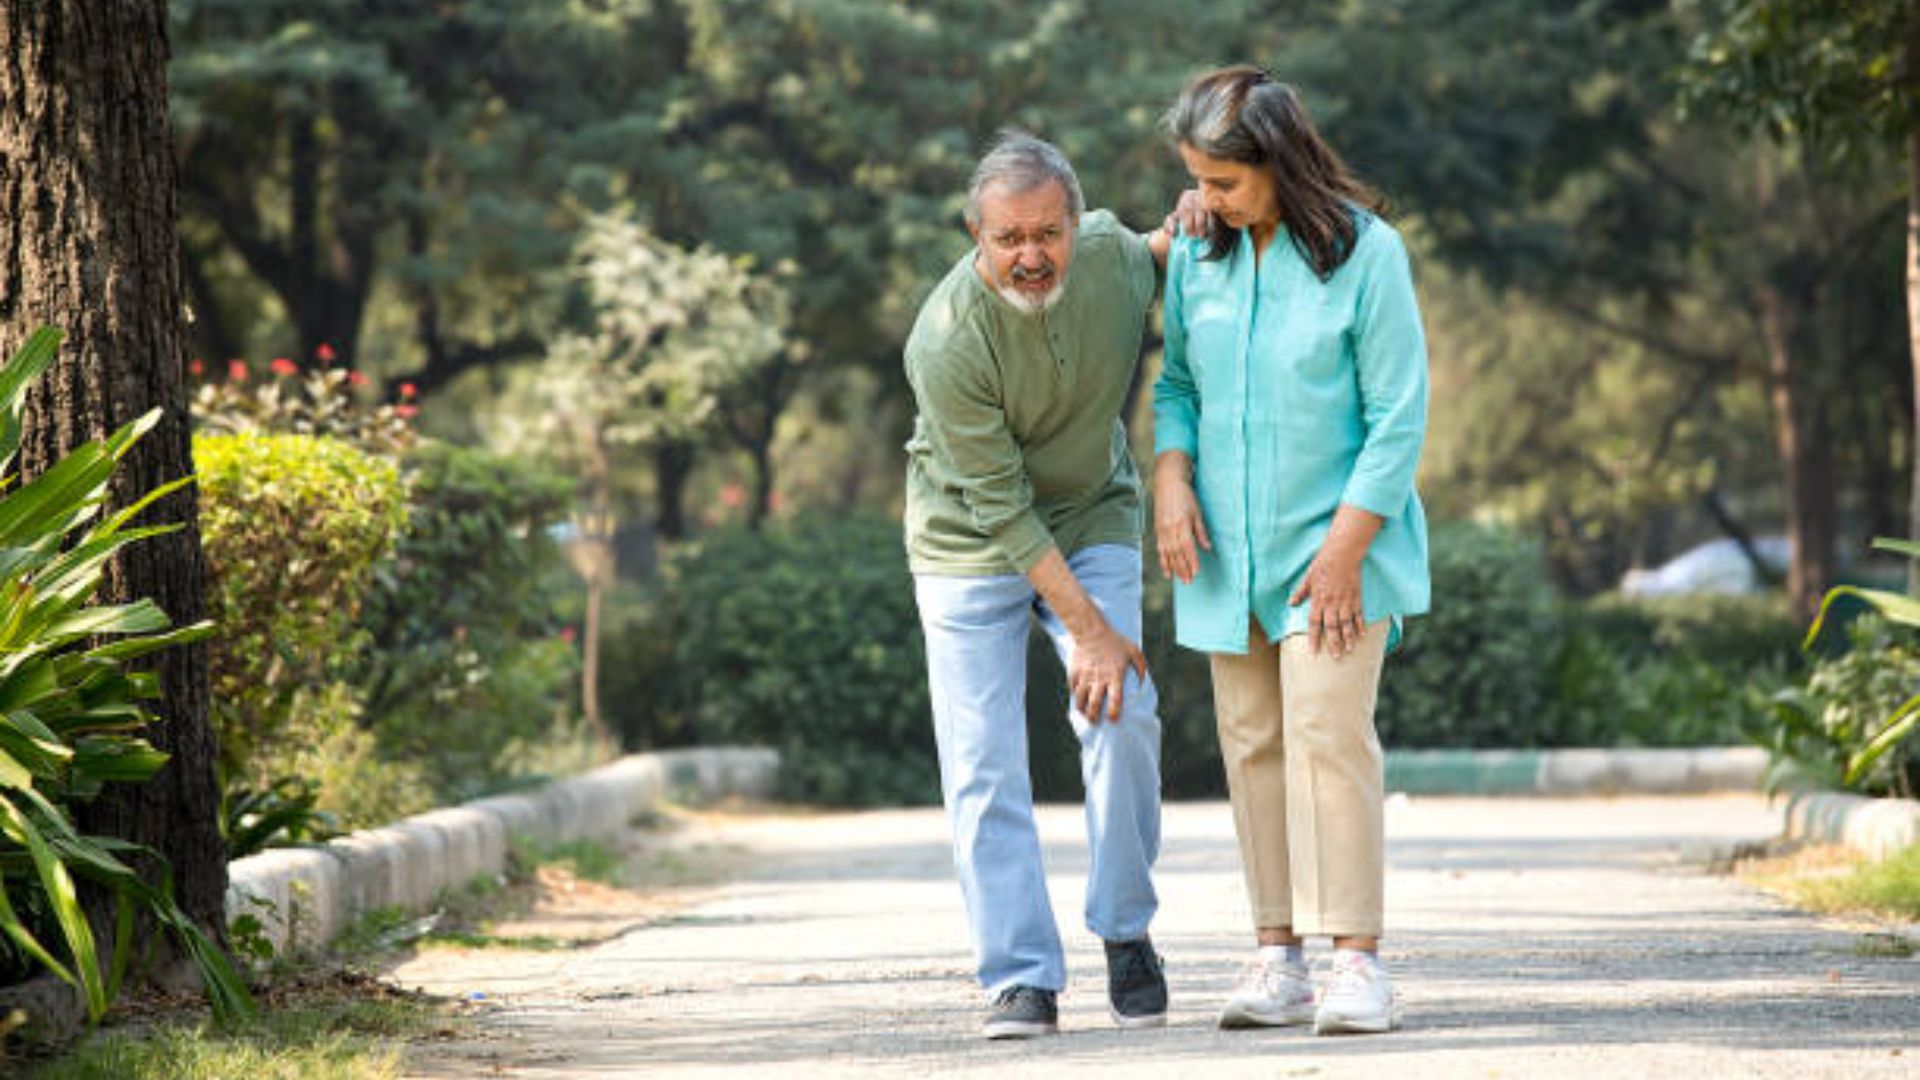 Man Feels Knee Pain While Walking Outdoors With His Partner